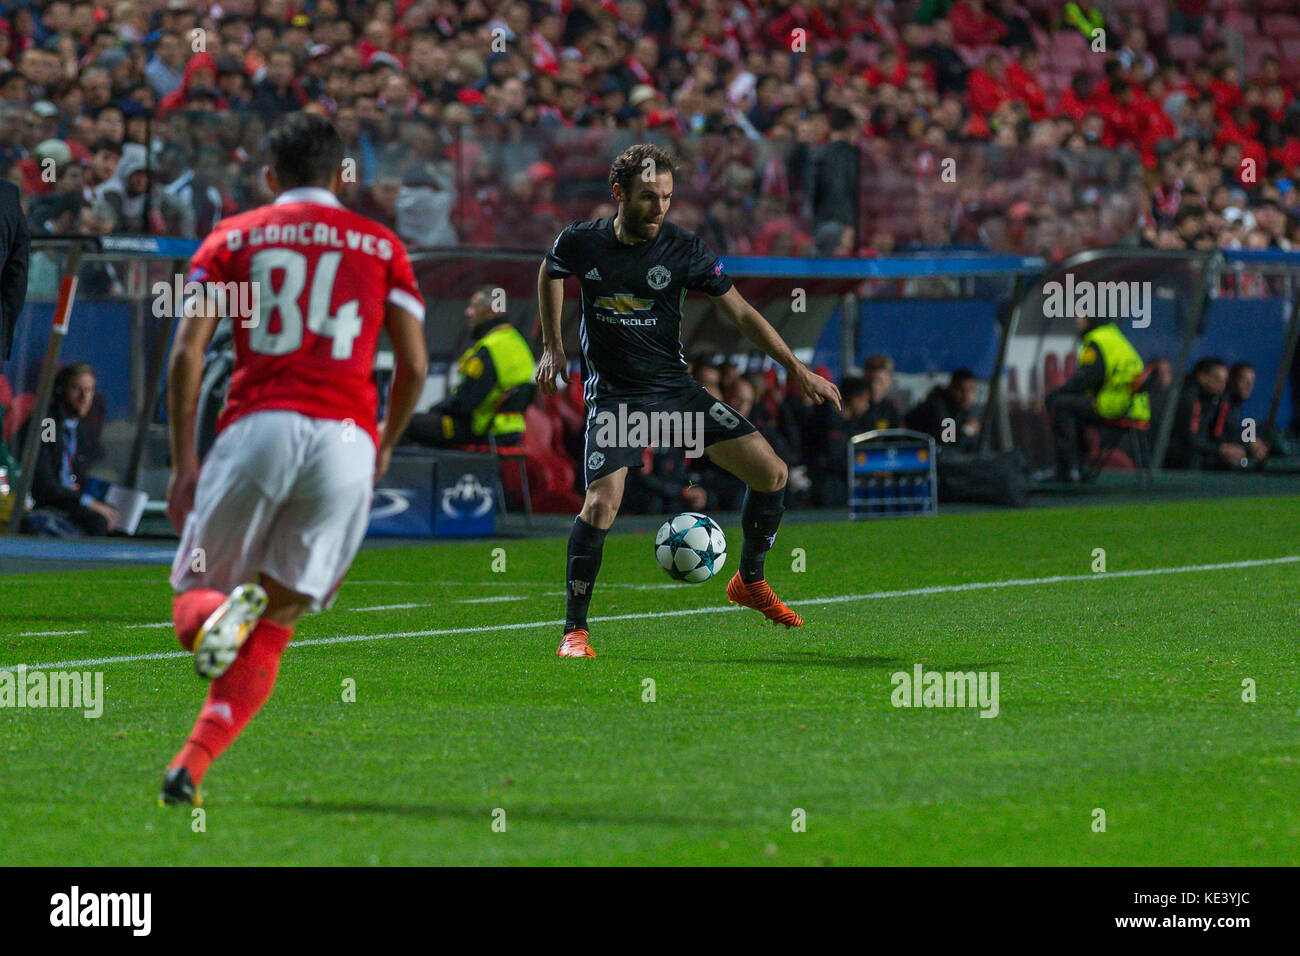 Lisbon, Portugal. 18th Oct, 2017. October 18, 2017. Lisbon, Portugal. Manchester UnitedÕs forward from Spain Juan Manuel Mata (8) during the game of the 3rd round of the UEFA Champions League Group A, SL Benfica v Manchester United FC Credit: Alexandre de Sousa/Alamy Live News Stock Photo